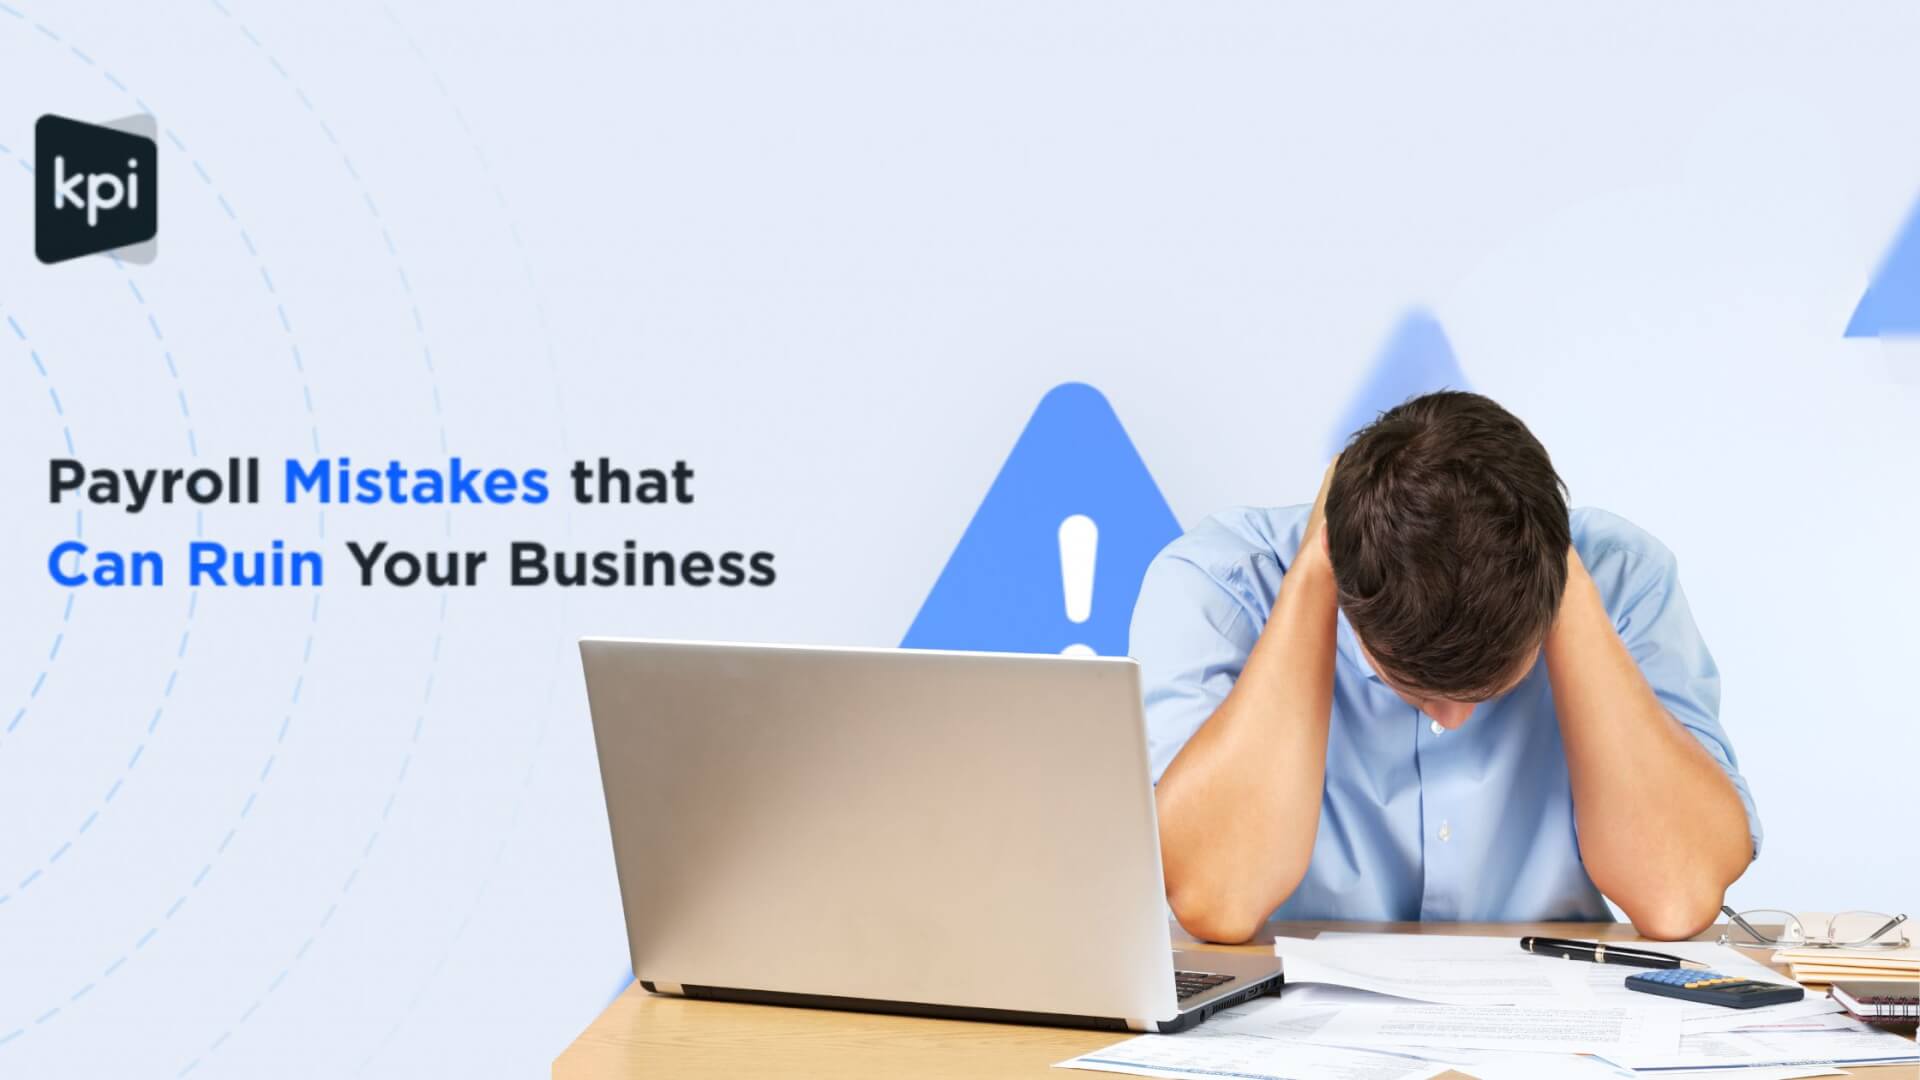 Payroll Mistakes that can ruin your business